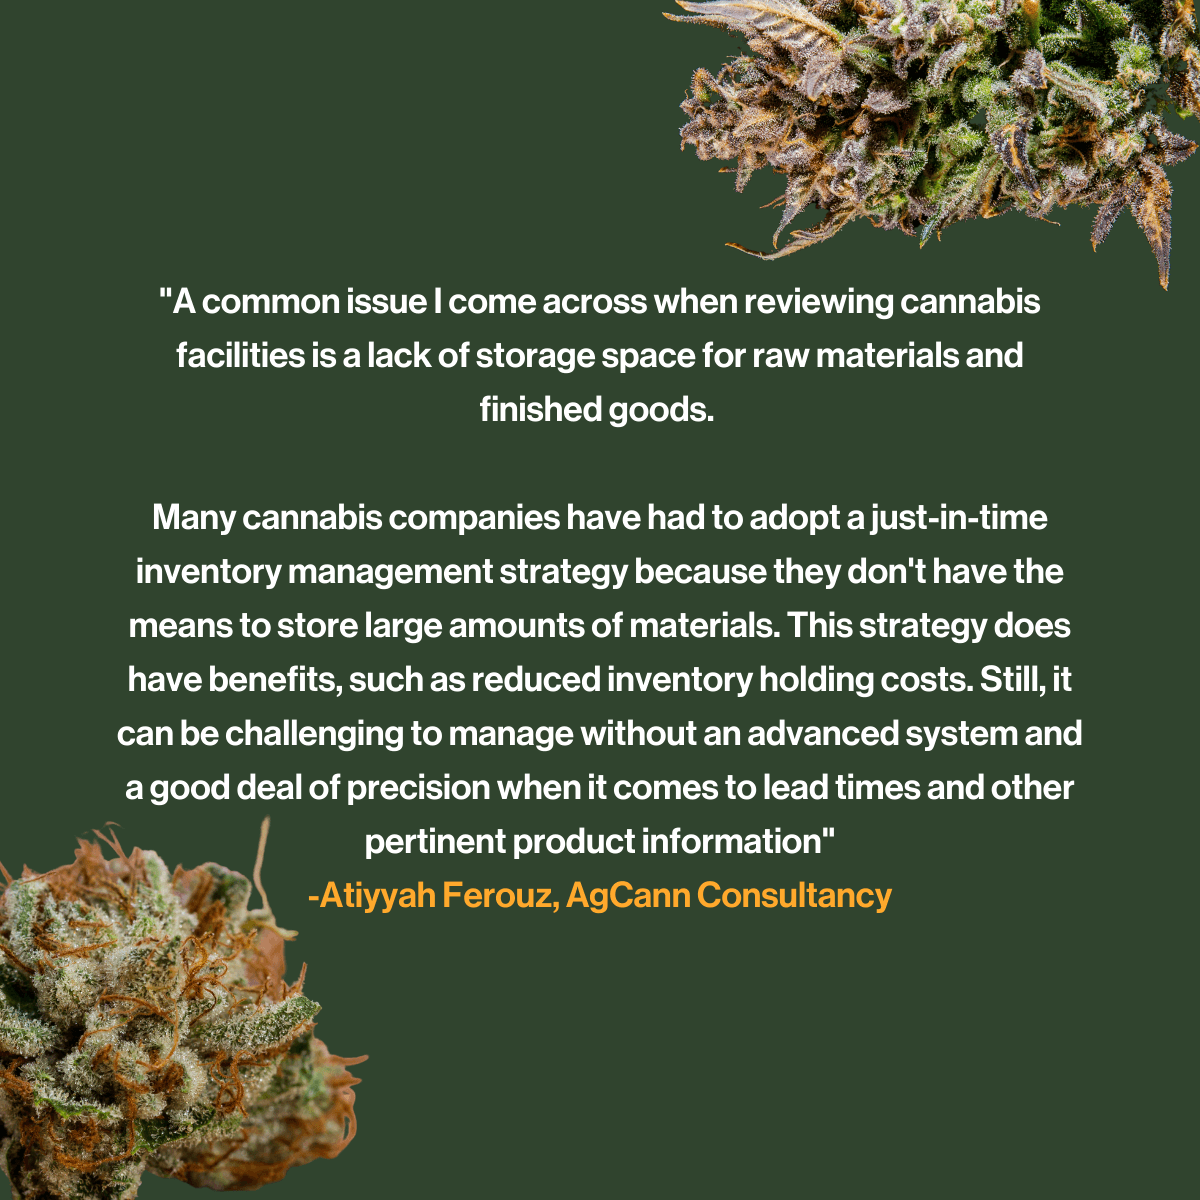 Quote from Elevated Signals partner - AgCann cannabis consulting